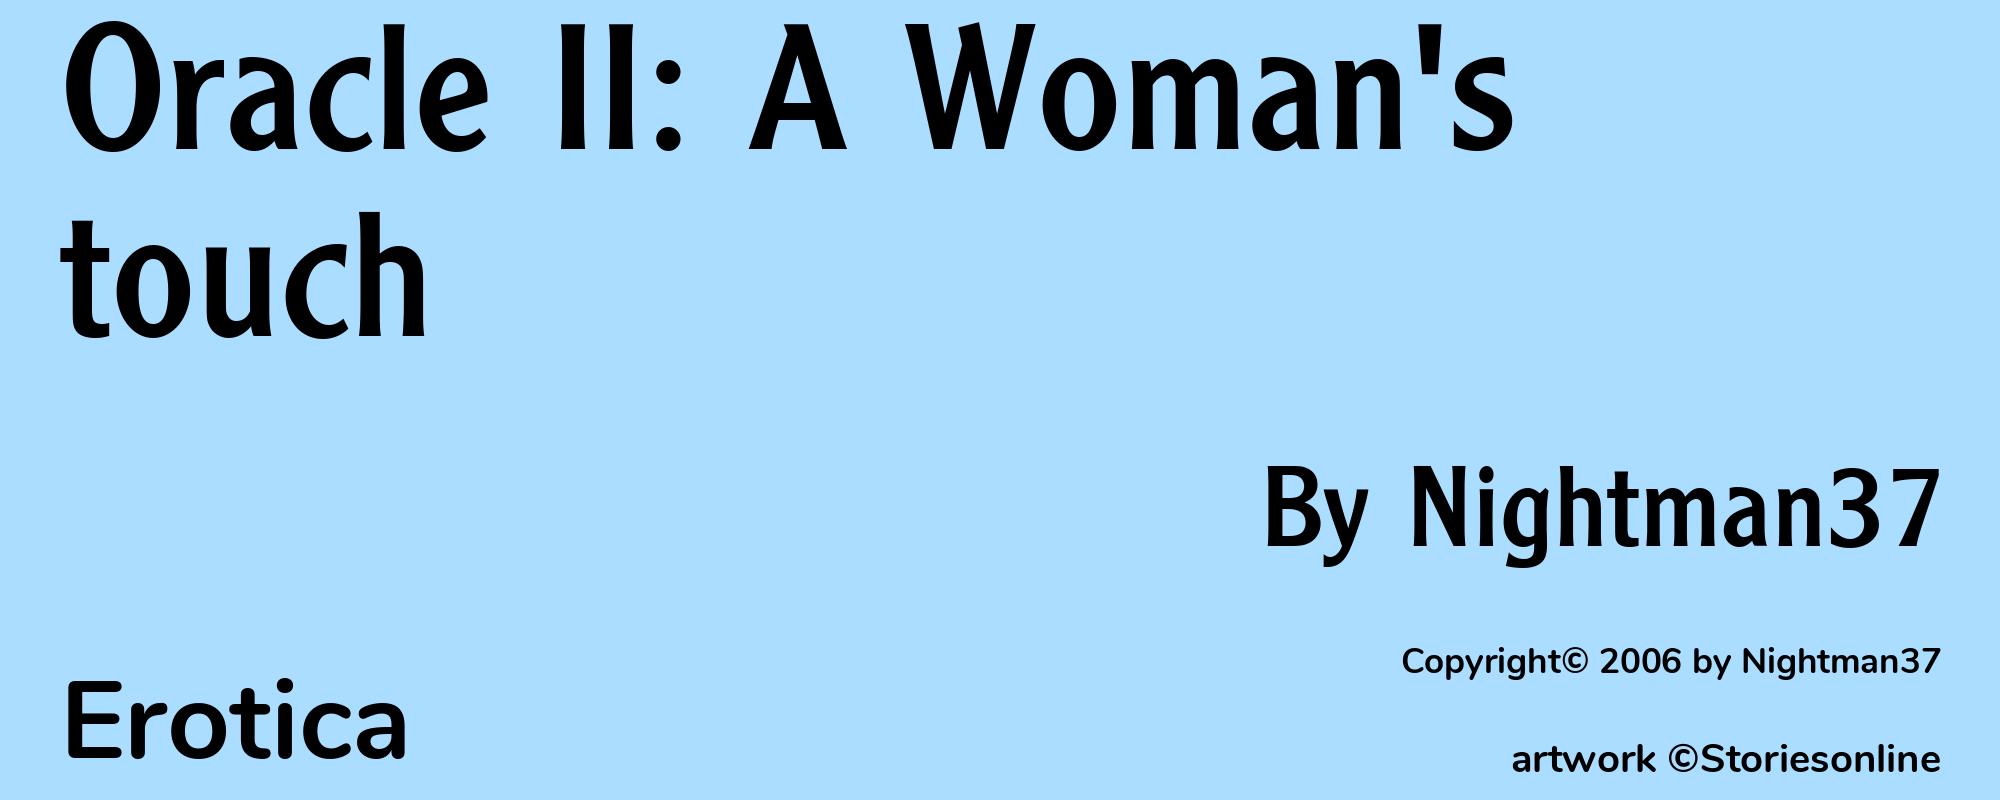 Oracle II: A Woman's touch - Cover